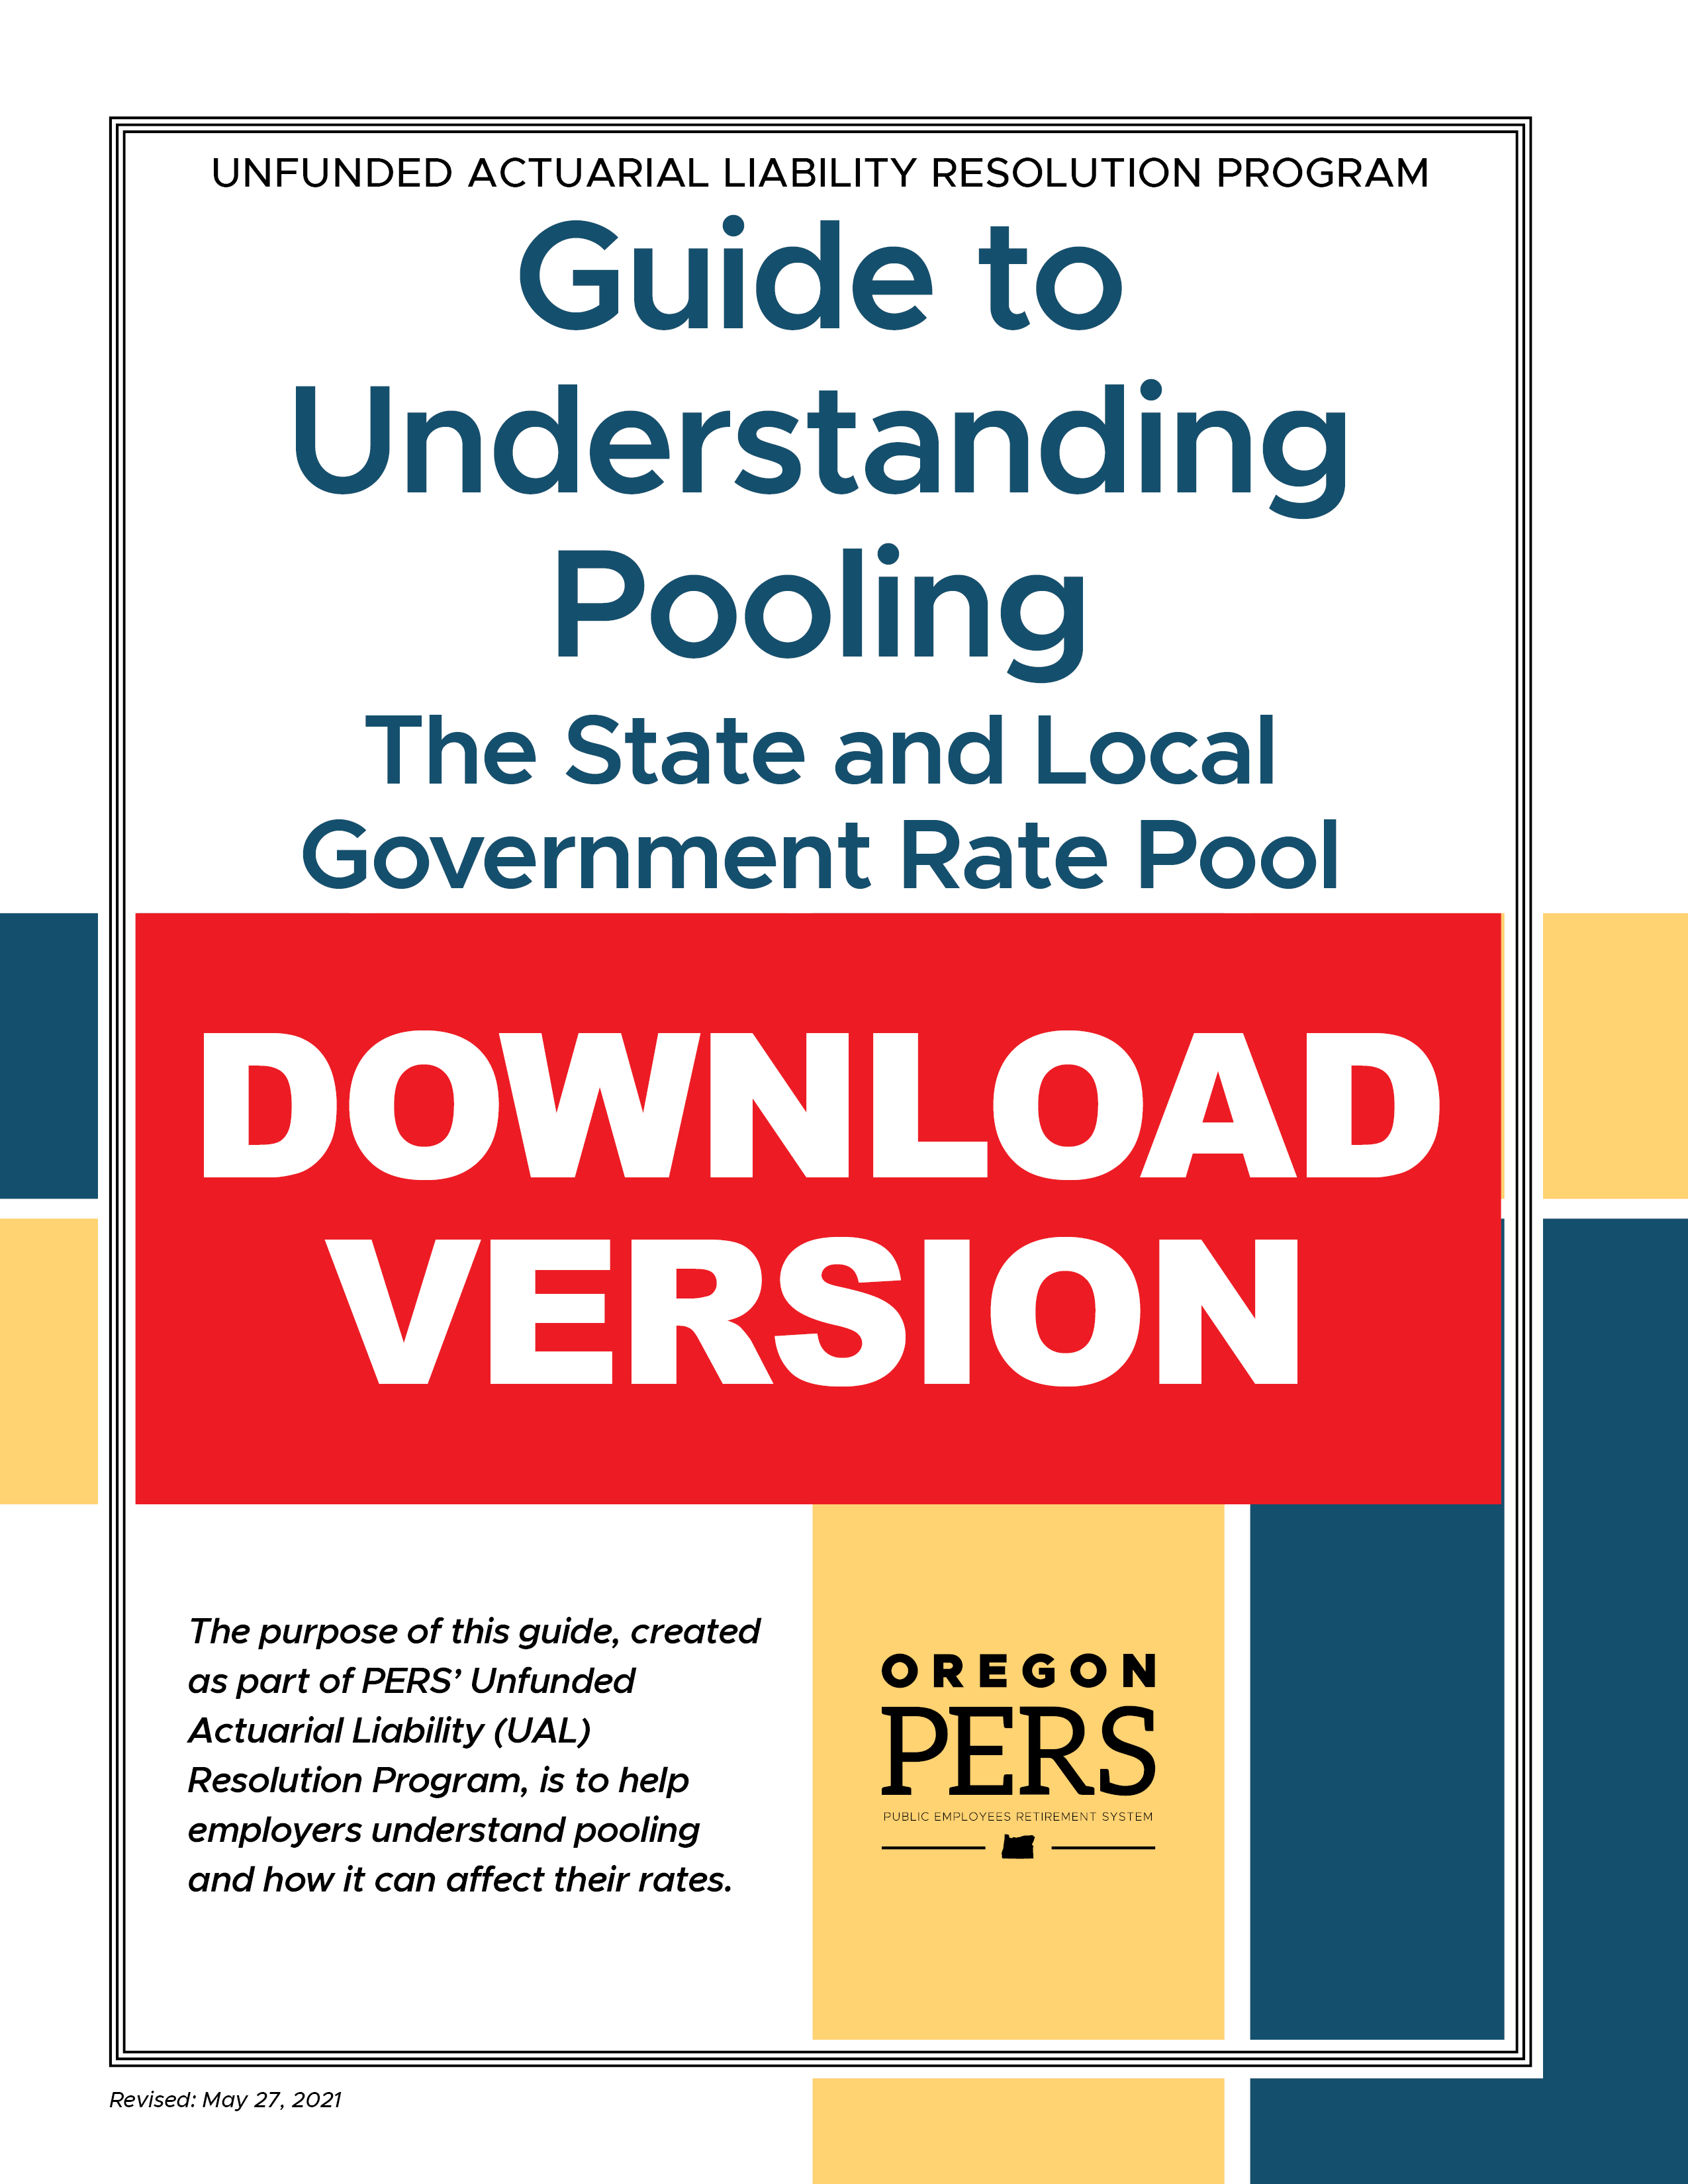 Cover image for PDF document Guide to Understanding Pooling - SLGRP download version